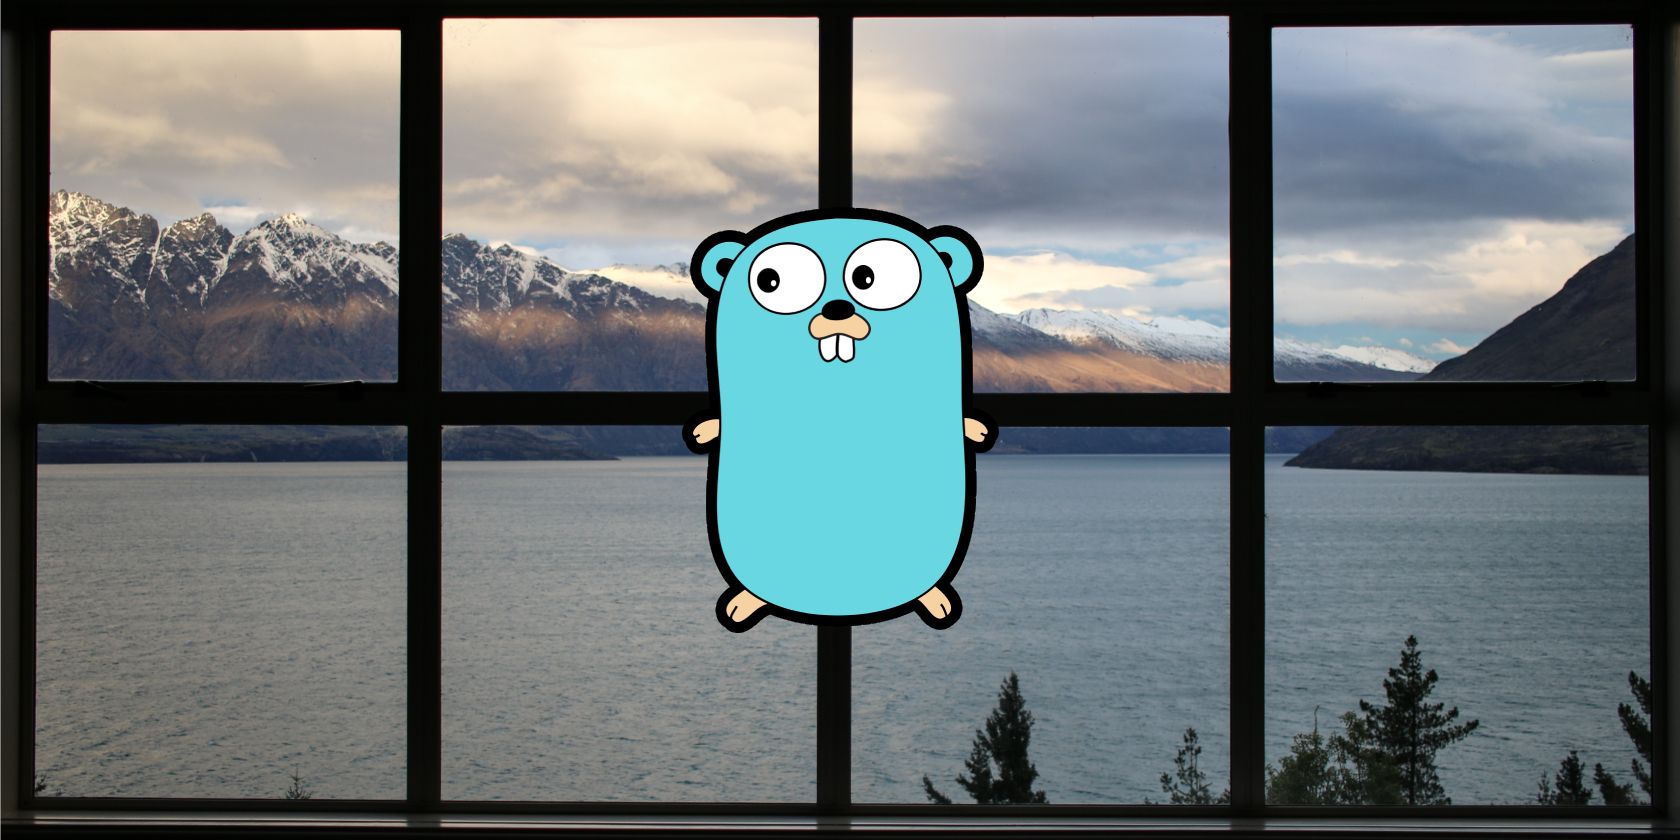 Go's blue gopher mascot superimposed in front of a window, through which a mountainous landscape is visible.